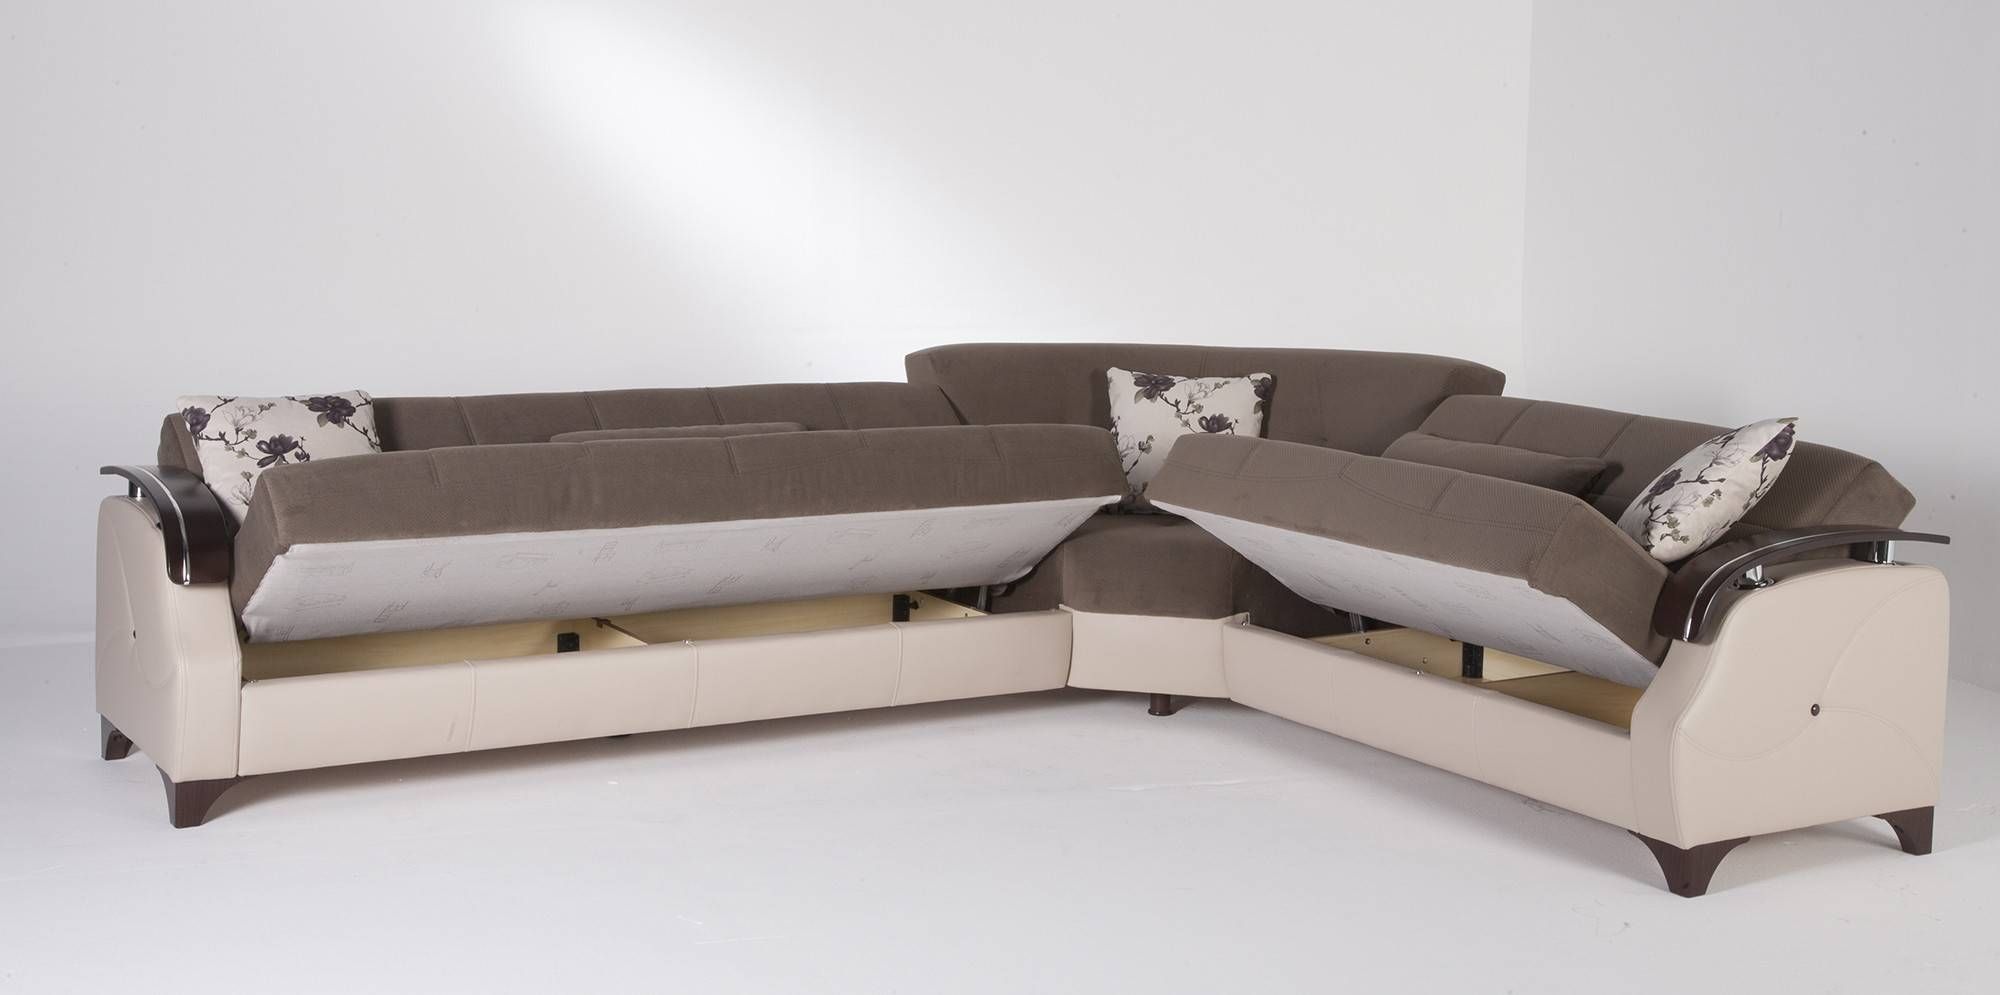 Sectional Sleeper Sofas Queen | Tehranmix Decoration Throughout Queen Size Sofa Bed Sheets (View 27 of 30)